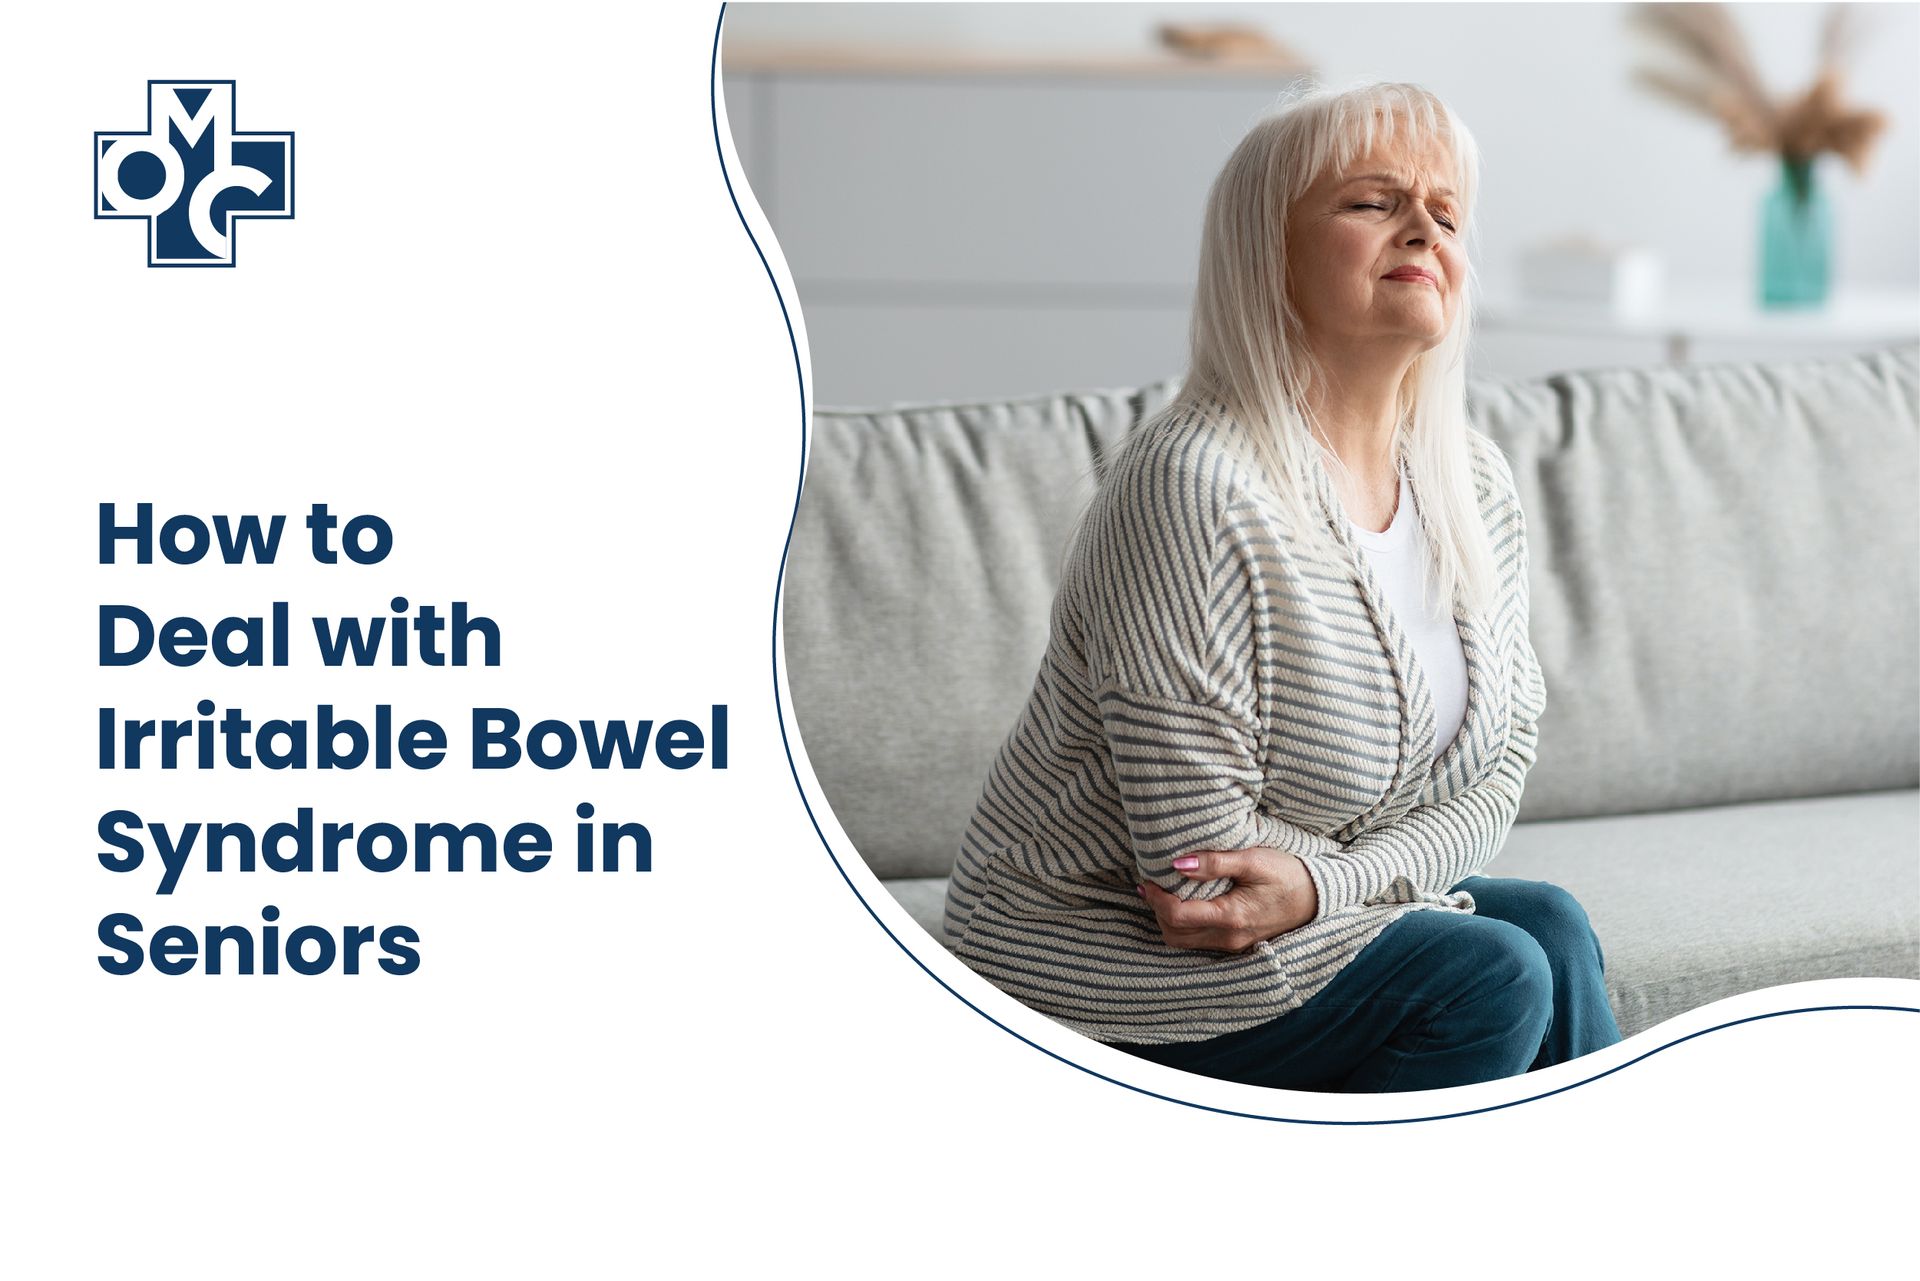 How to Deal with Irritable Bowel Syndrome in Seniors